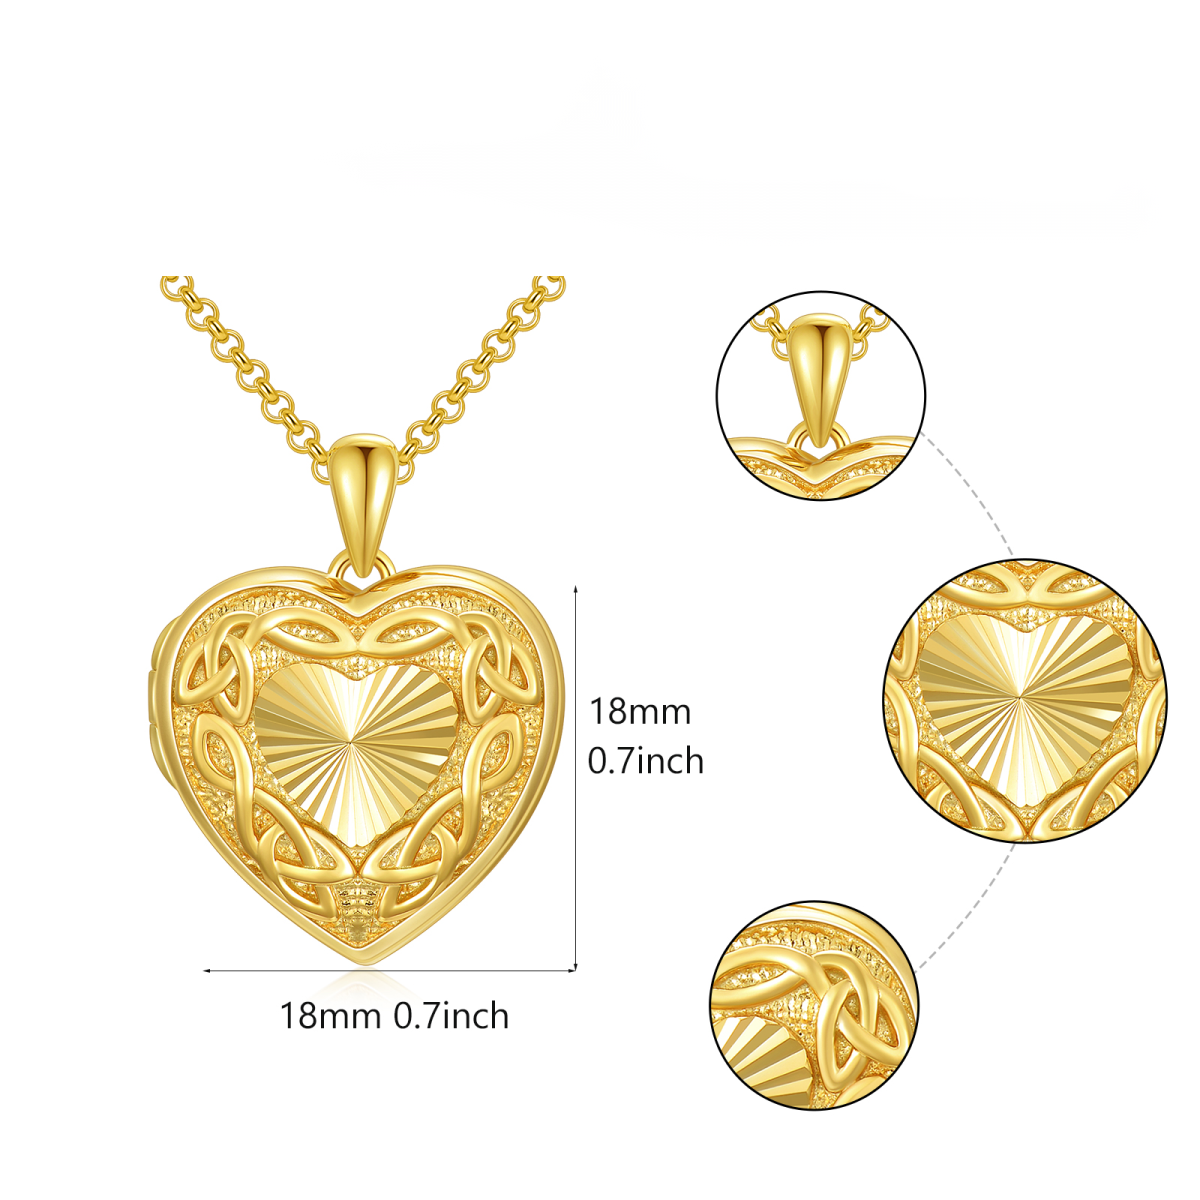 10K Gold Personalized Photo & Celtic Knot & Heart Personalized Photo Locket Necklace-6